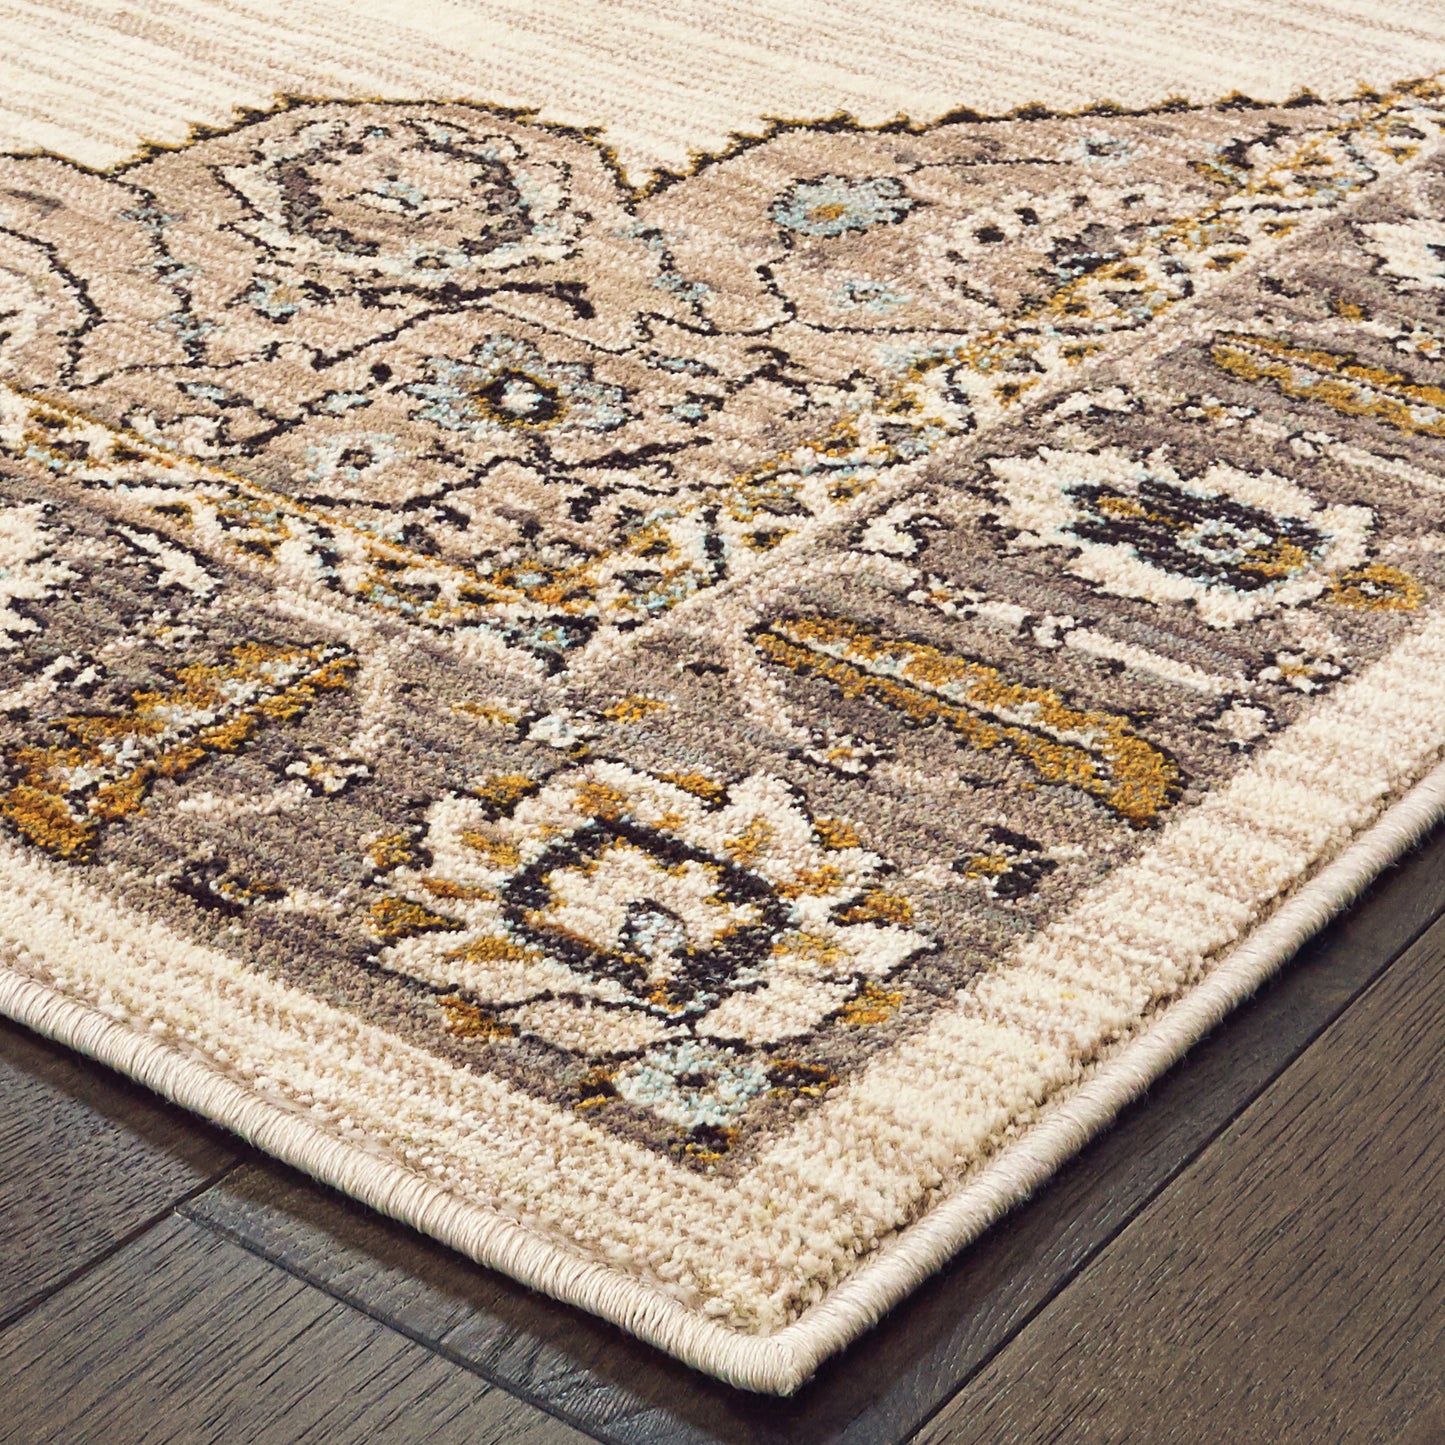 SEDONA Medallion Power-Loomed Synthetic Blend Indoor Area Rug by Oriental Weavers